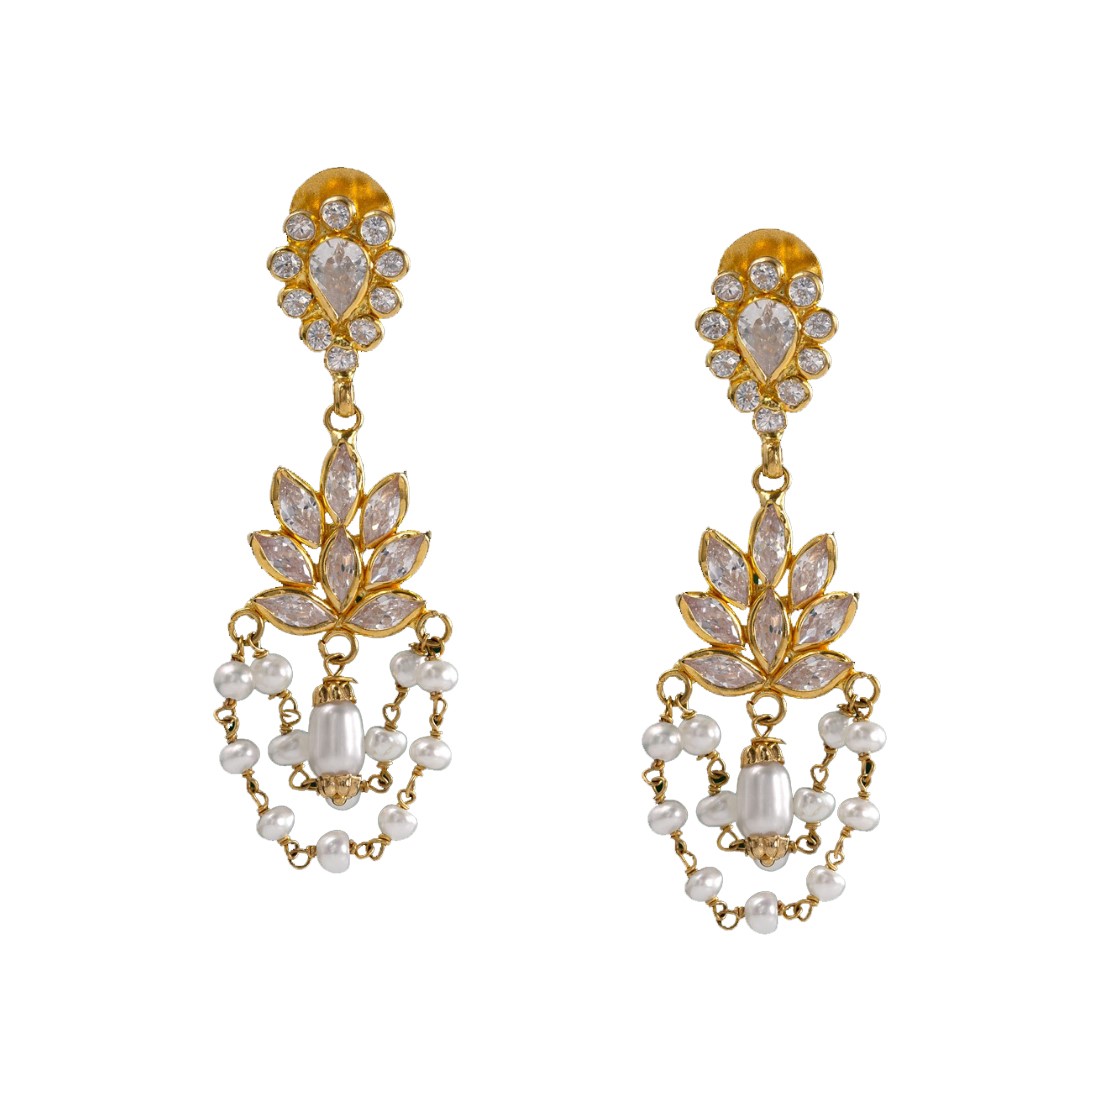 Pearl Layer Earrings - Buy Gold With CZ and Pearl Layer Earrings ...